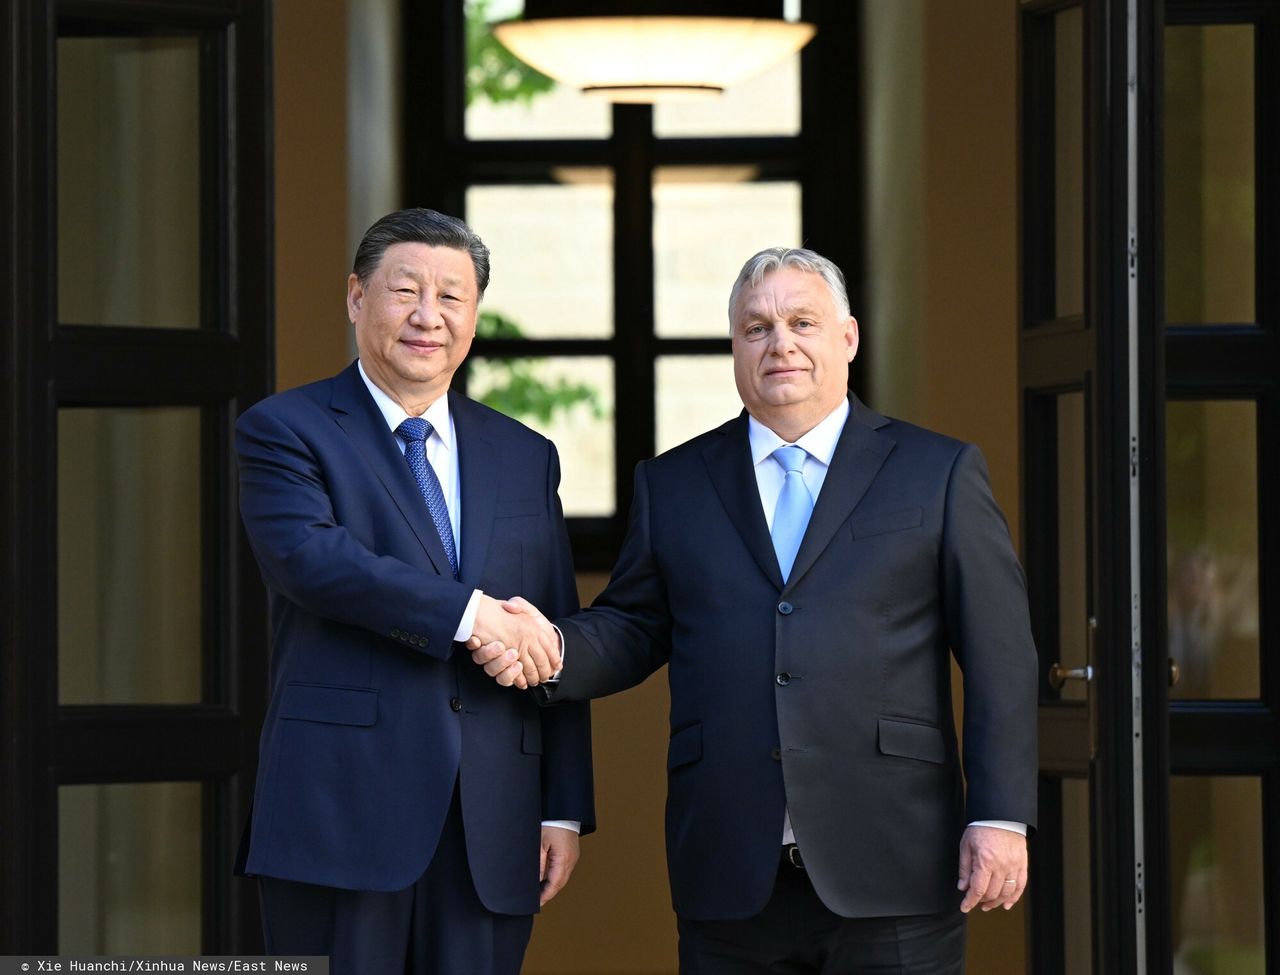 The leader of China, Xi Jinping, on a trip through Europe, met with the Hungarian Prime Minister Viktor Orban.